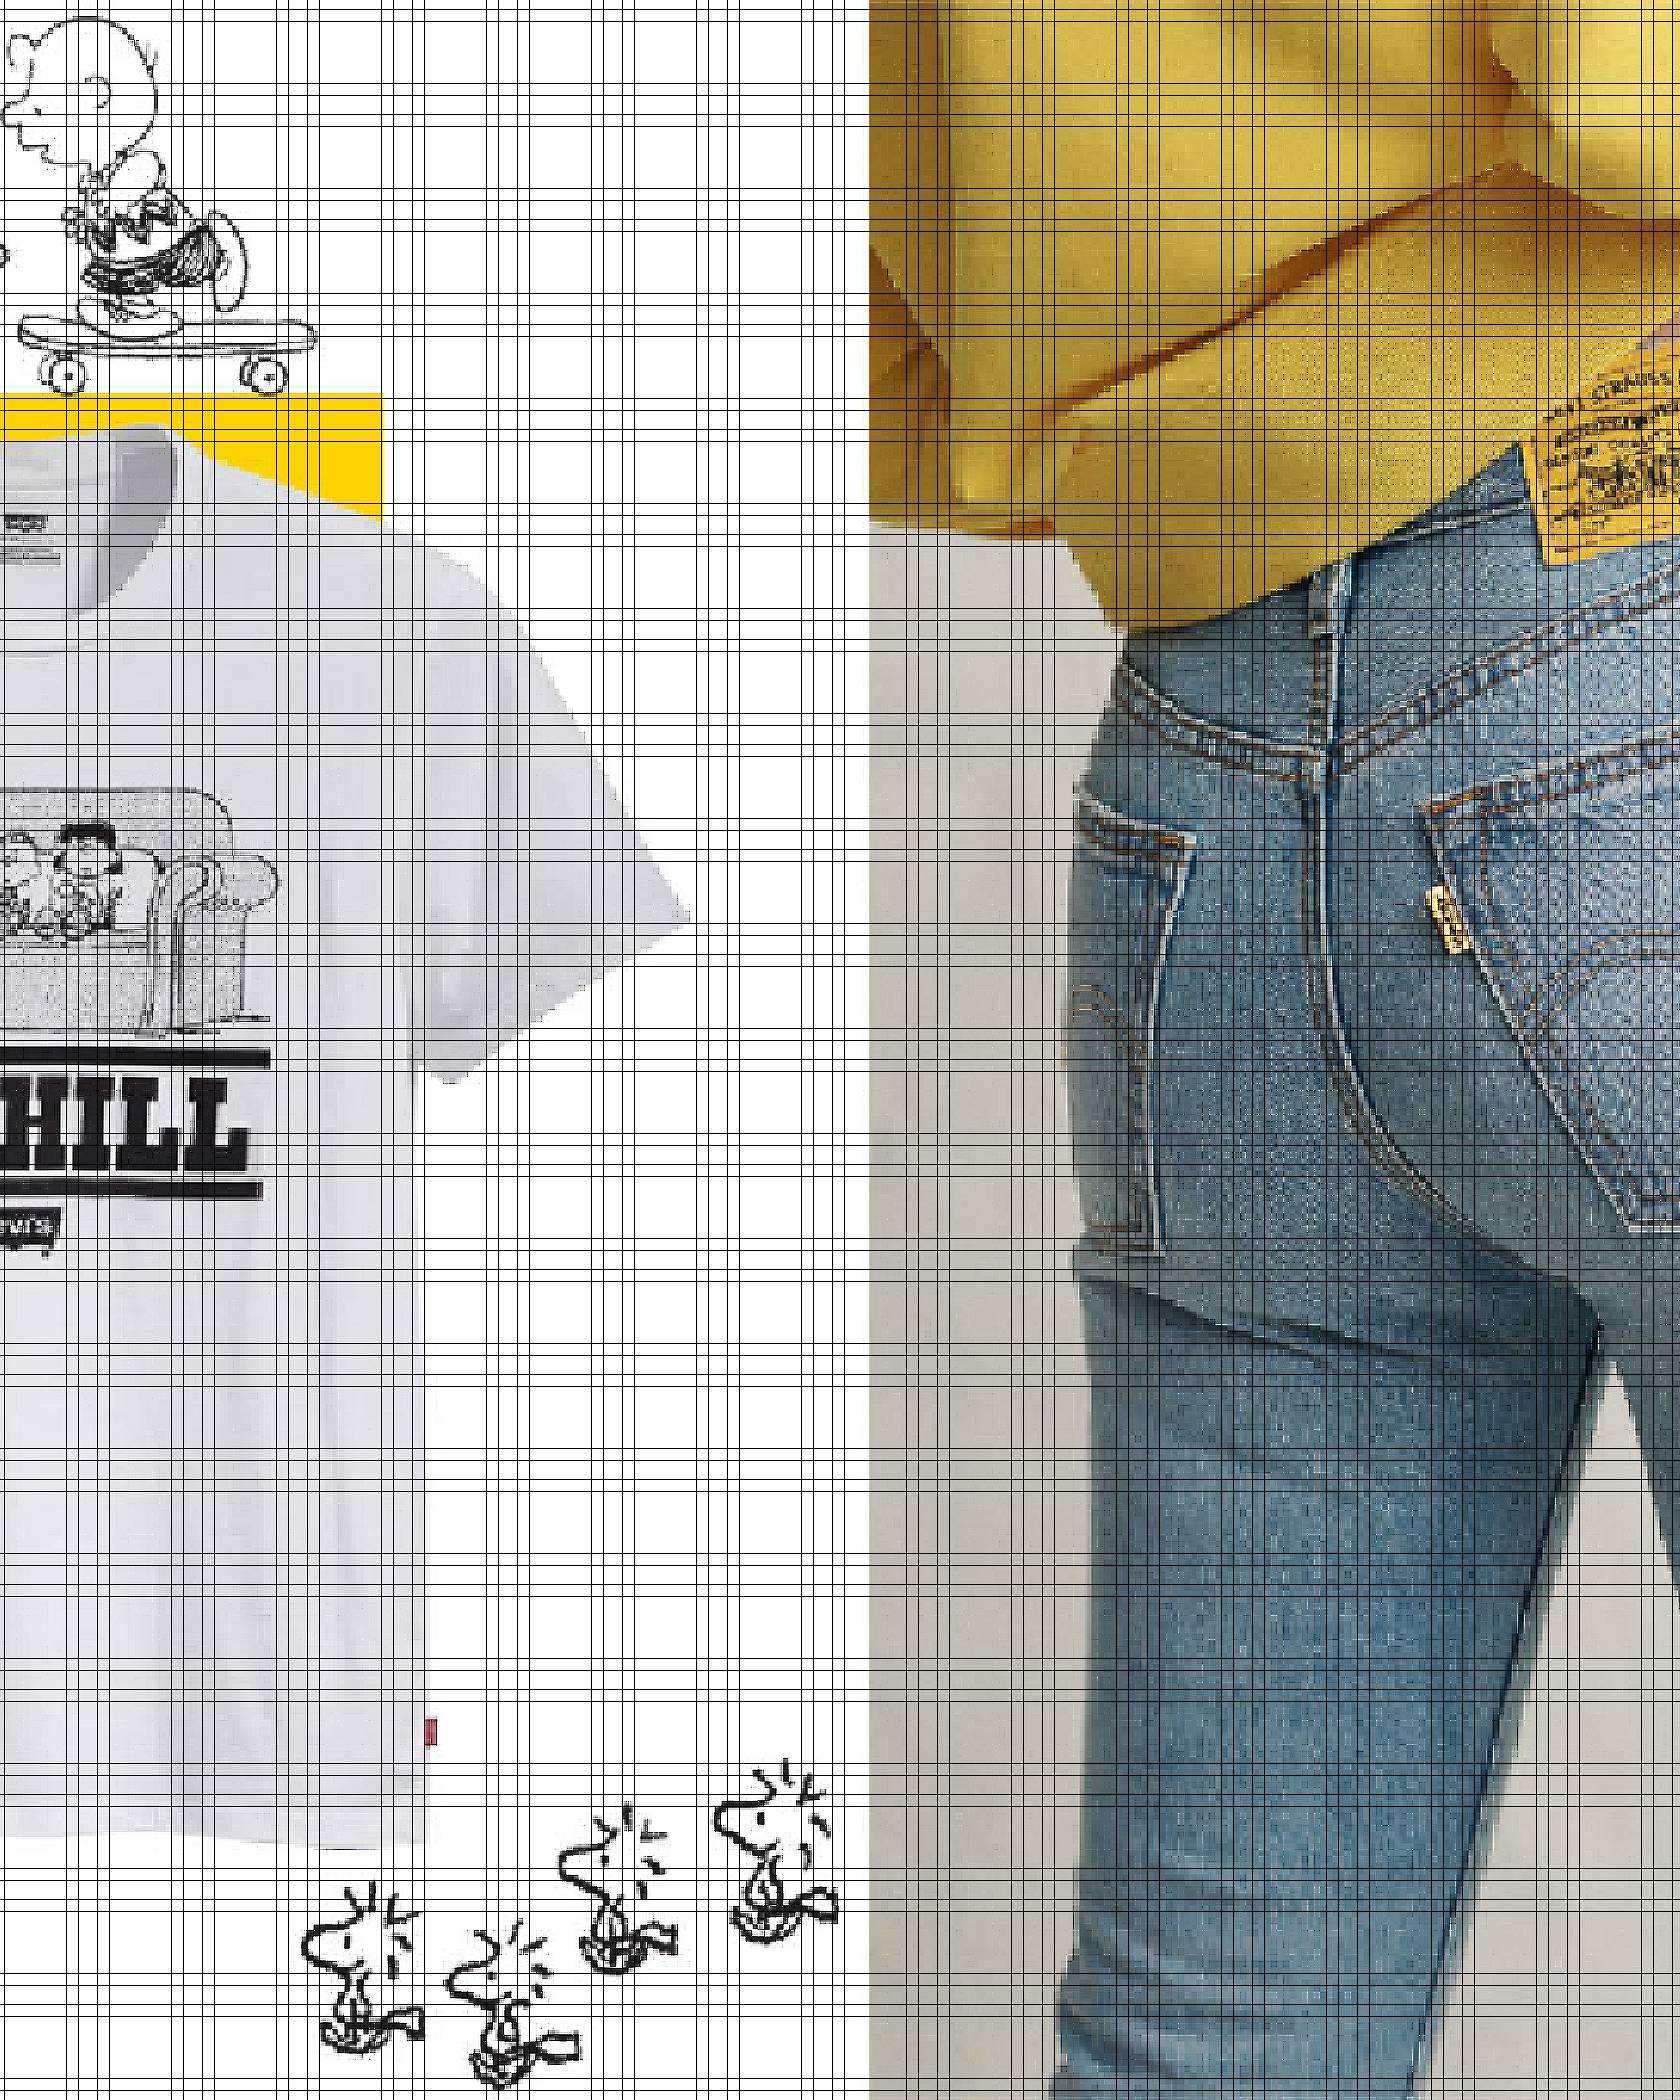 Peanuts image, on the right are peanuts jeans with a yellow levi's tab.